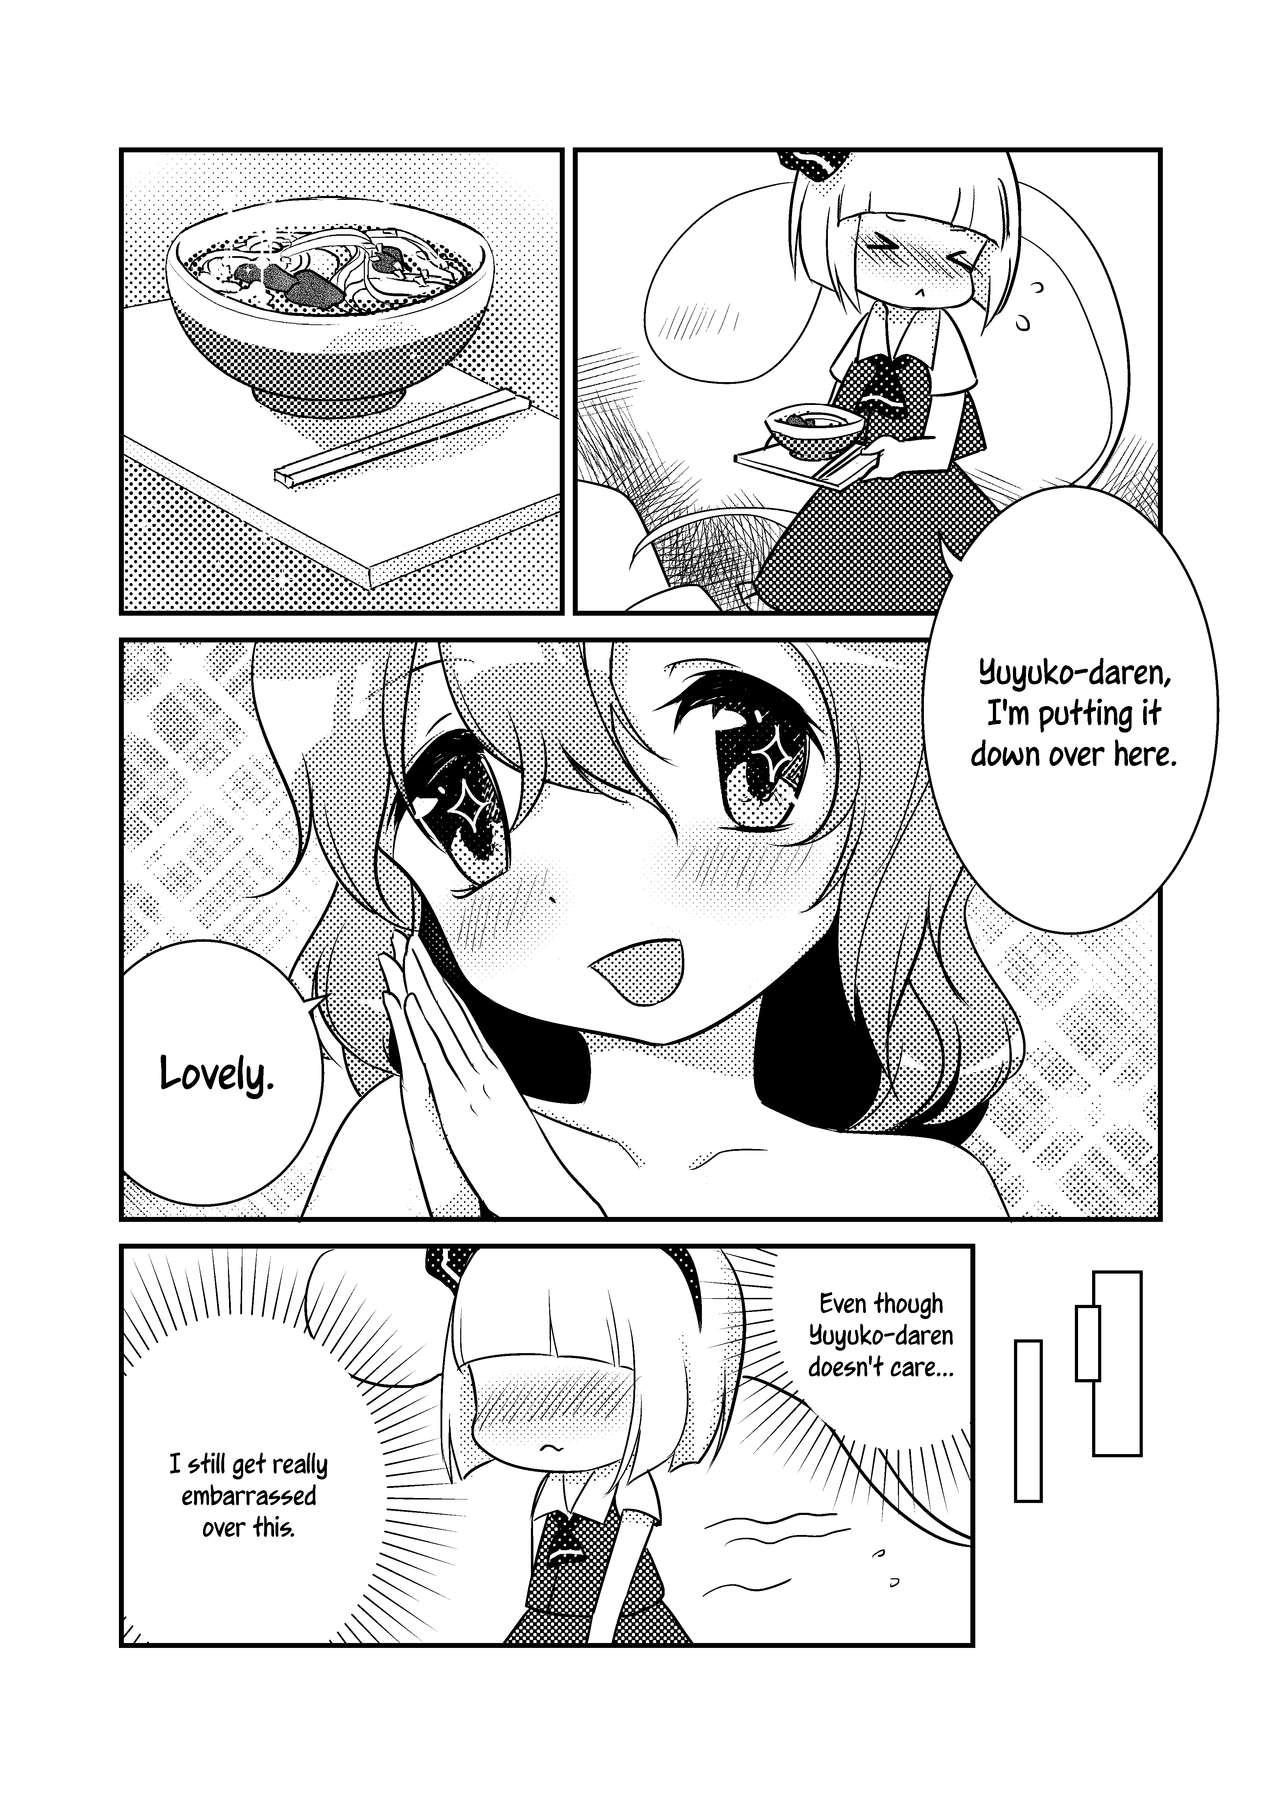 Mistress ????一起泡温泉吧！ | ????Let's Soak in the Hot Spring! - Touhou project Best Blowjobs Ever - Page 4